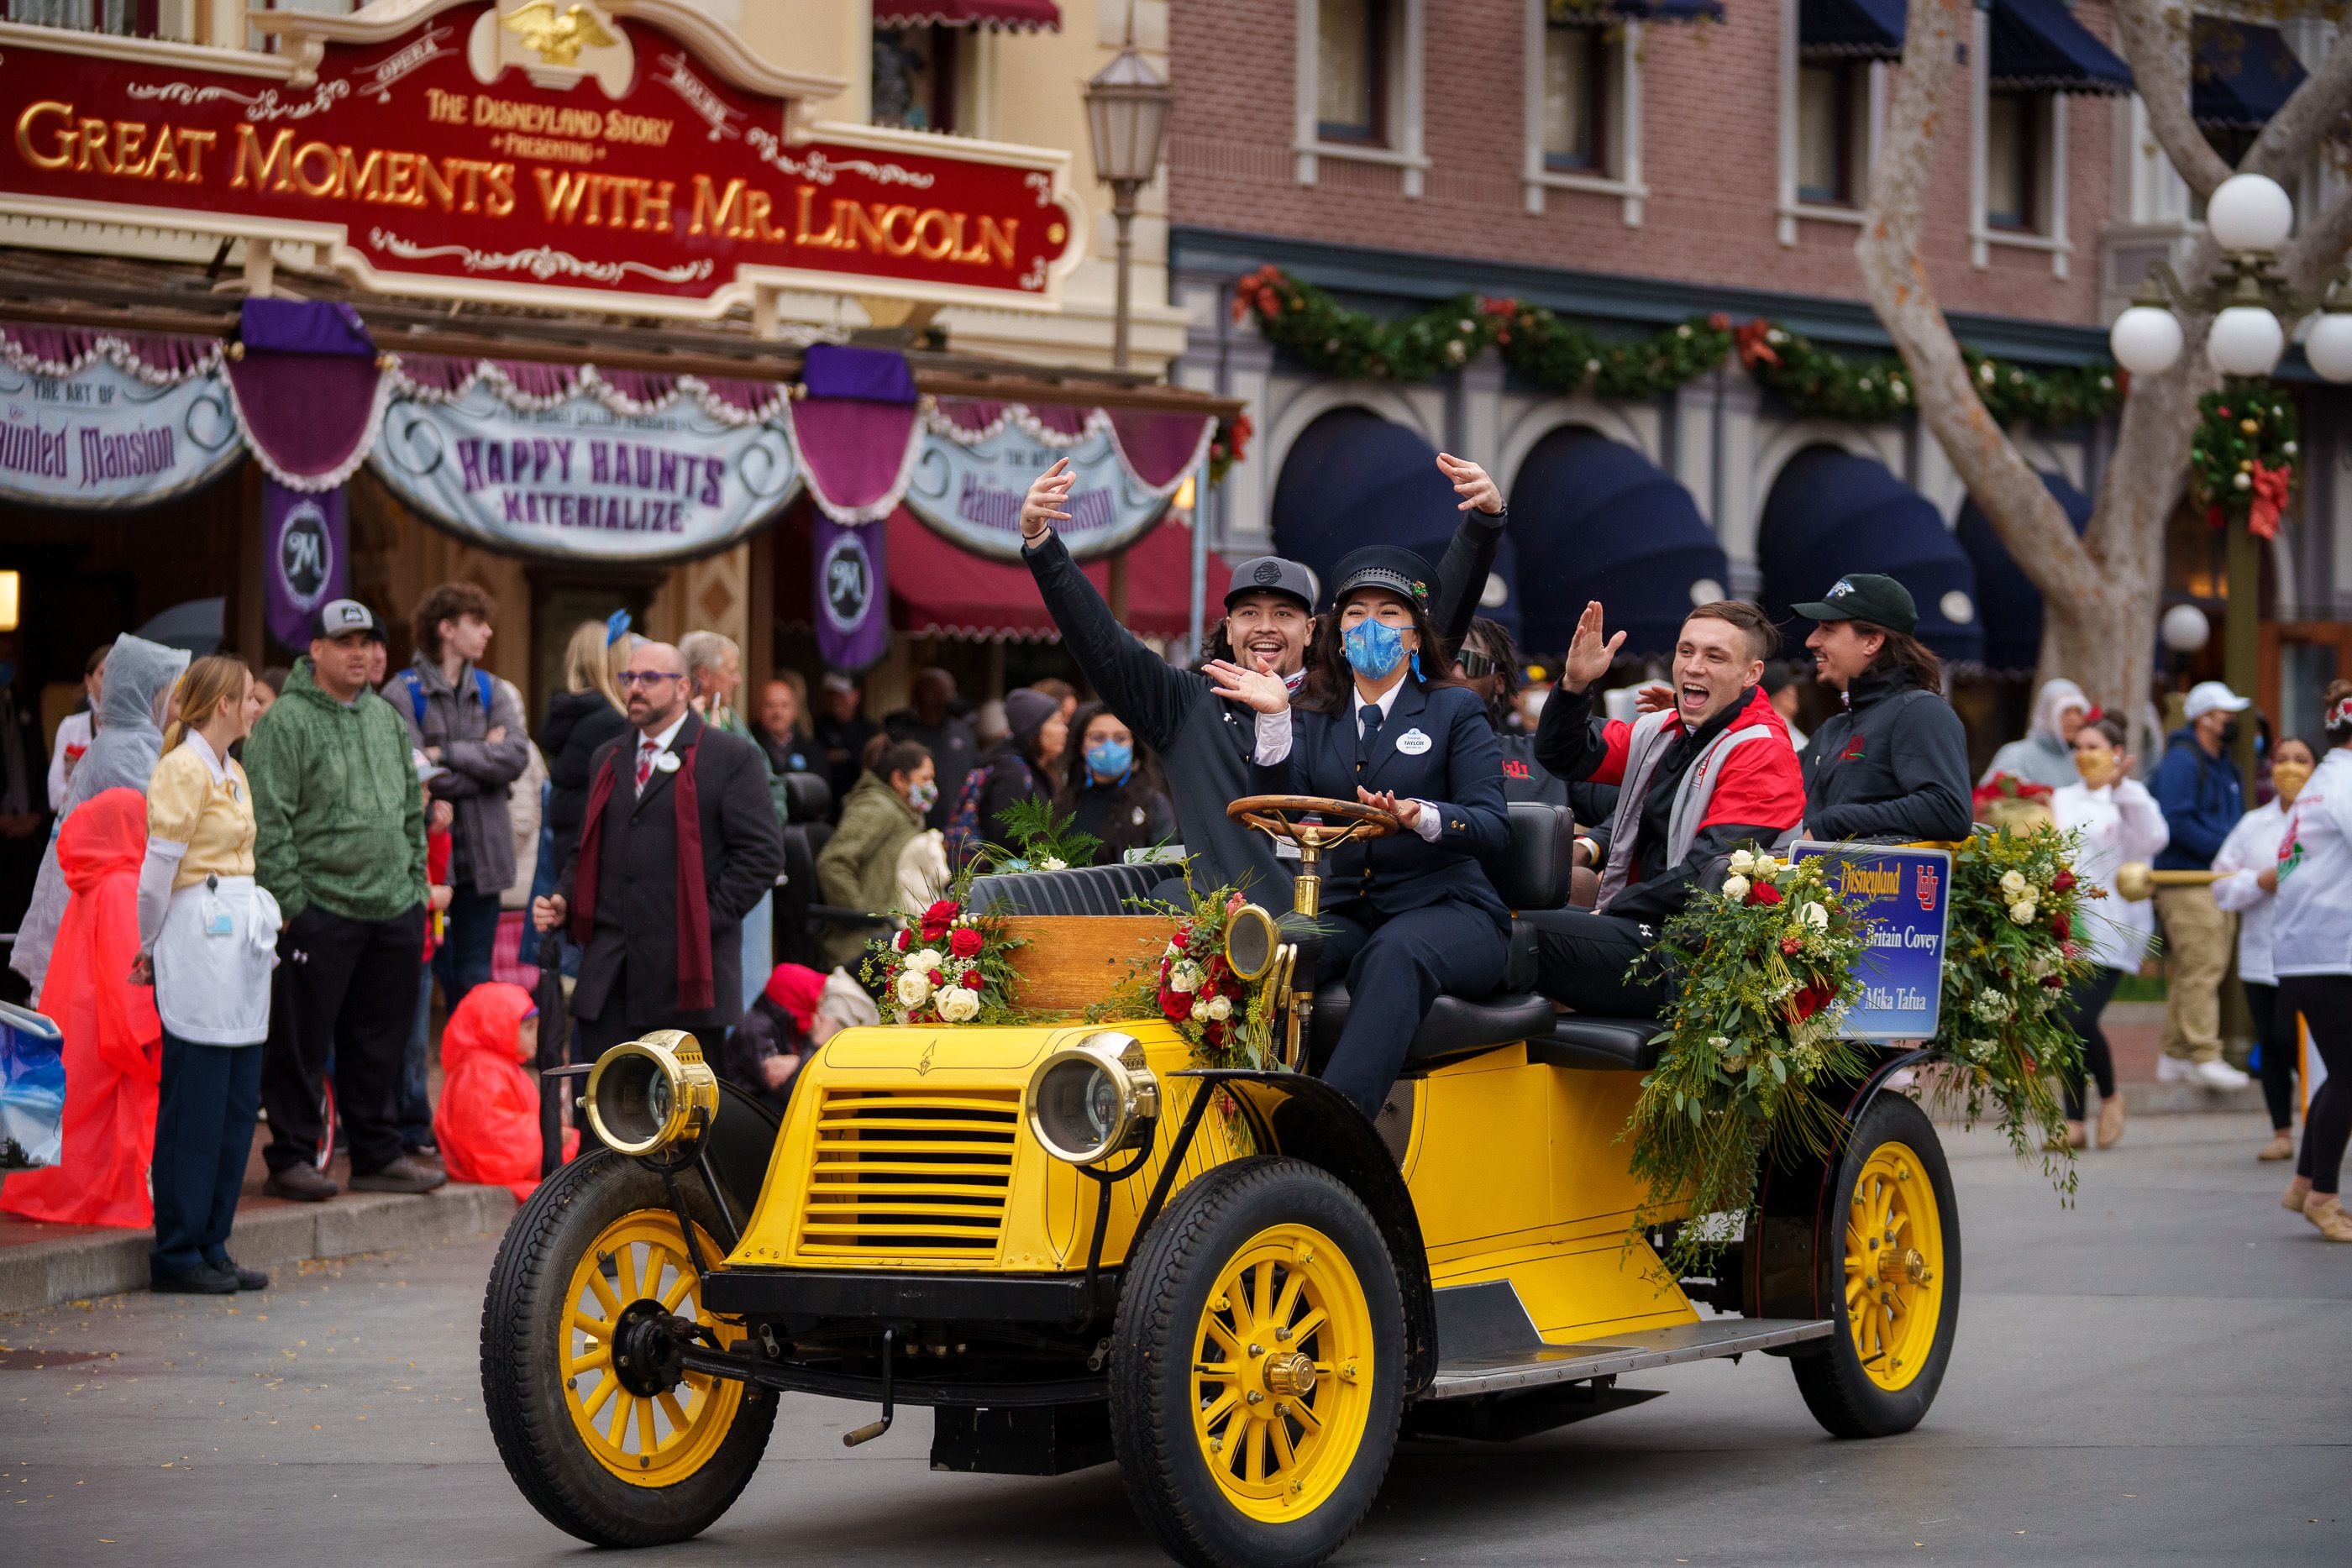 (Trent Nelson | The Salt Lake Tribune) Mika Tafua, Devin Lloyd, Britain Covey and Cameron Rising ride down Disneyland's Main Street during the Rose Bowl Game Cavalcade in Anaheim, Calif., on Monday, Dec. 27, 2021.